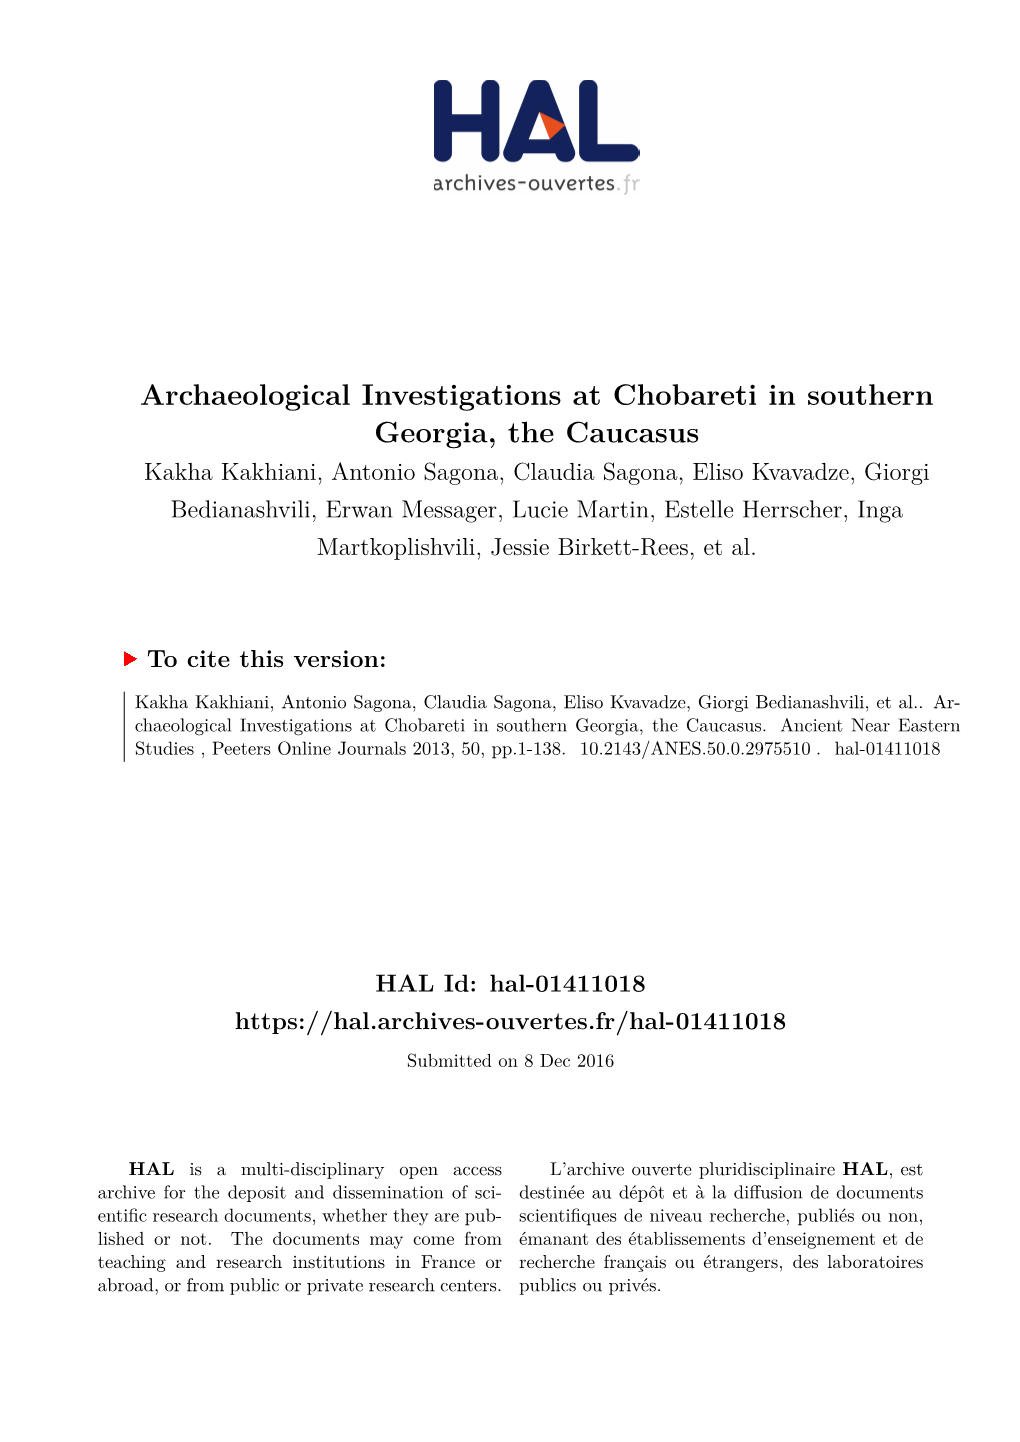 Archaeological Investigations at Chobareti in Southern Georgia, the Caucasus